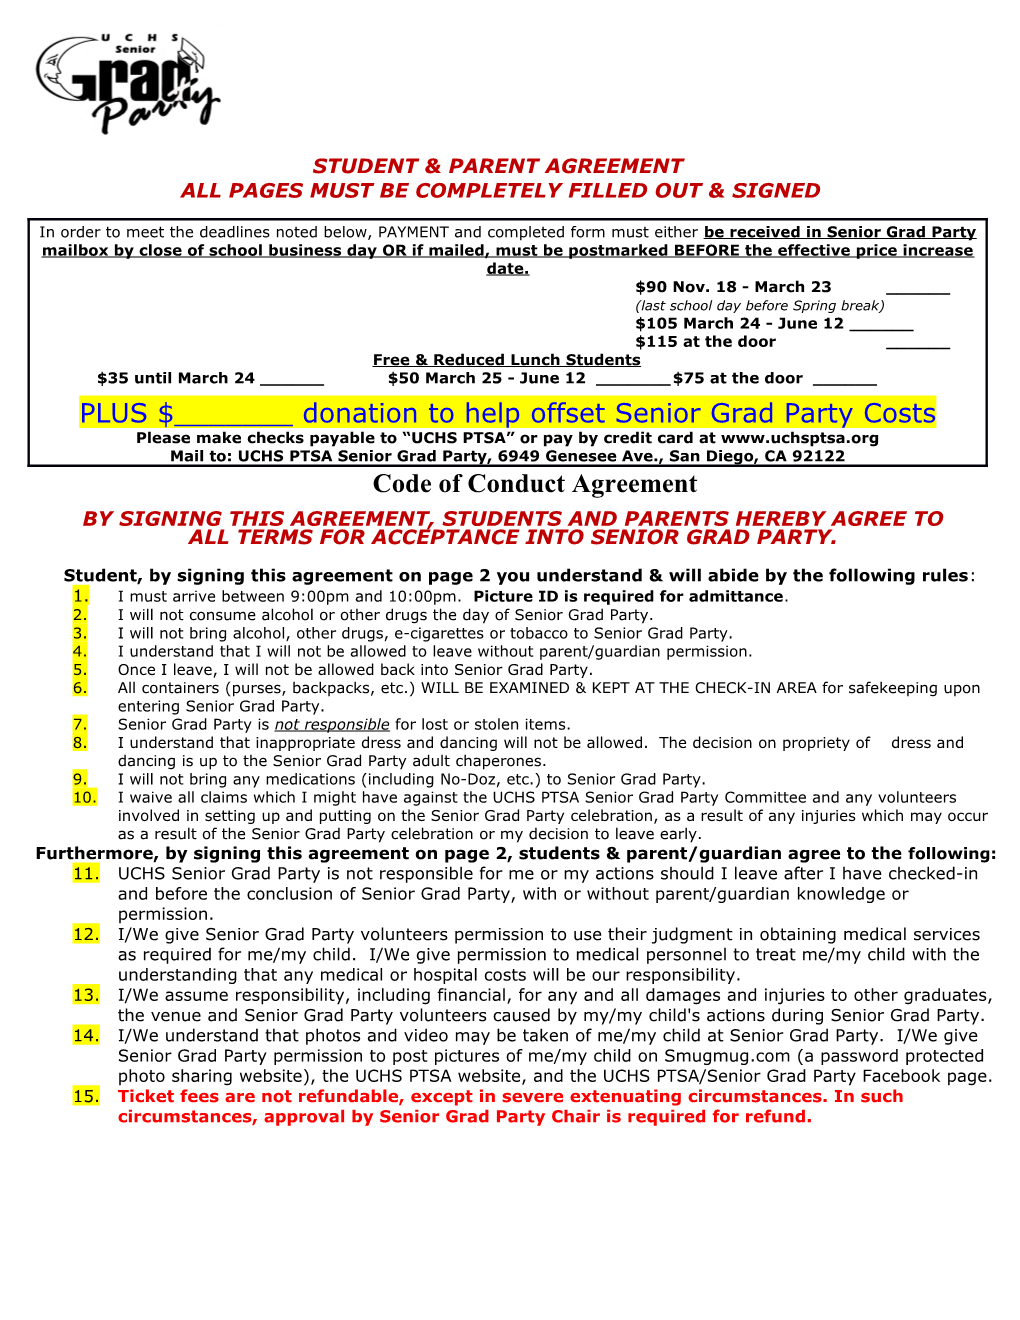 Student & Parent Agreement Form Must Be